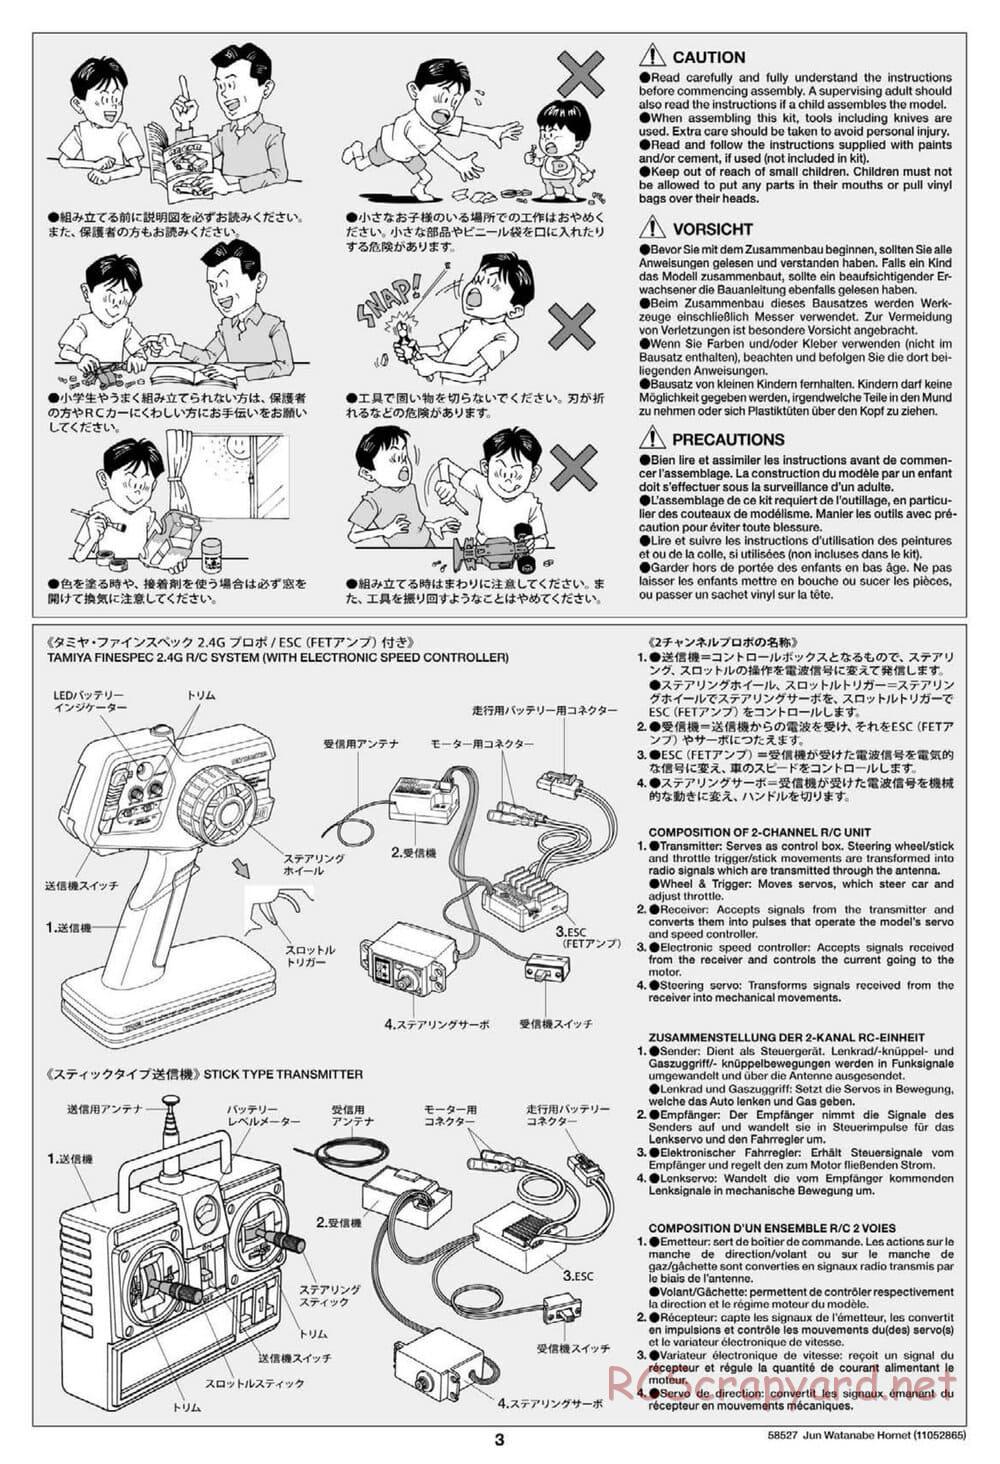 Tamiya - The Hornet by Jun Watanabe - GH Chassis - Manual - Page 3